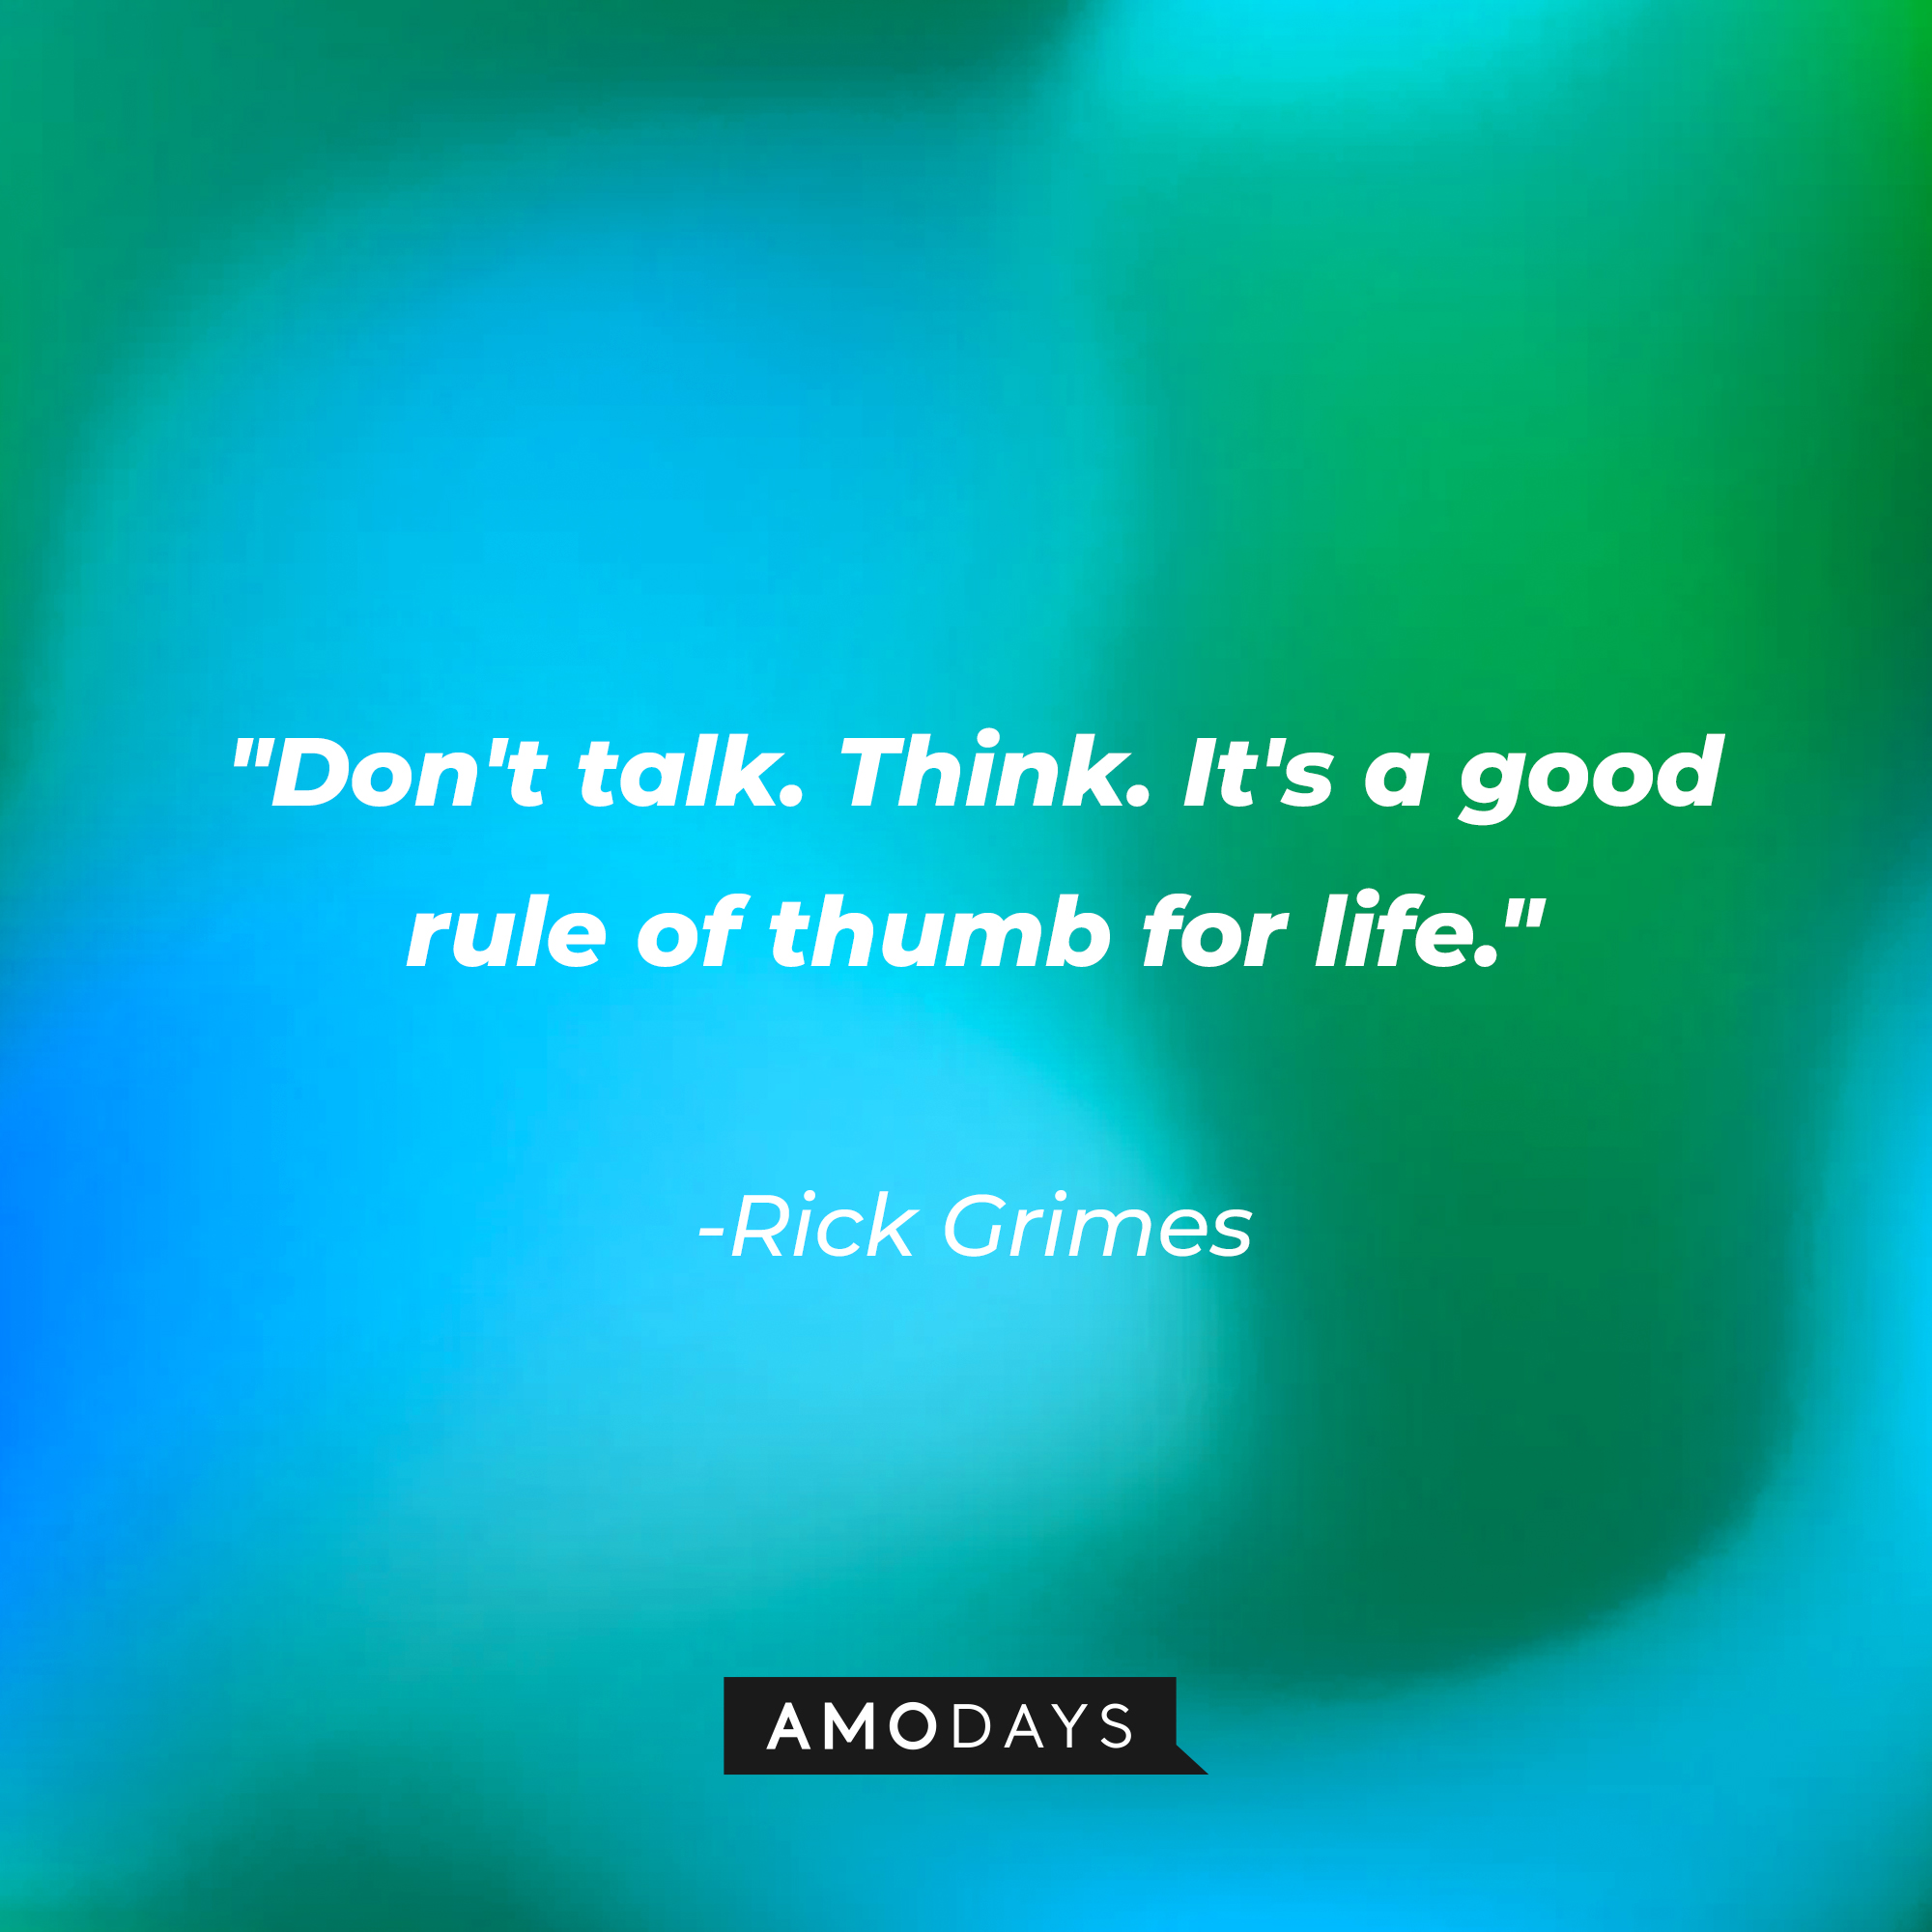 Rick Grimes' quote: "Don't talk. Think. It's a good rule of thumb for life." | Source: AmoDays